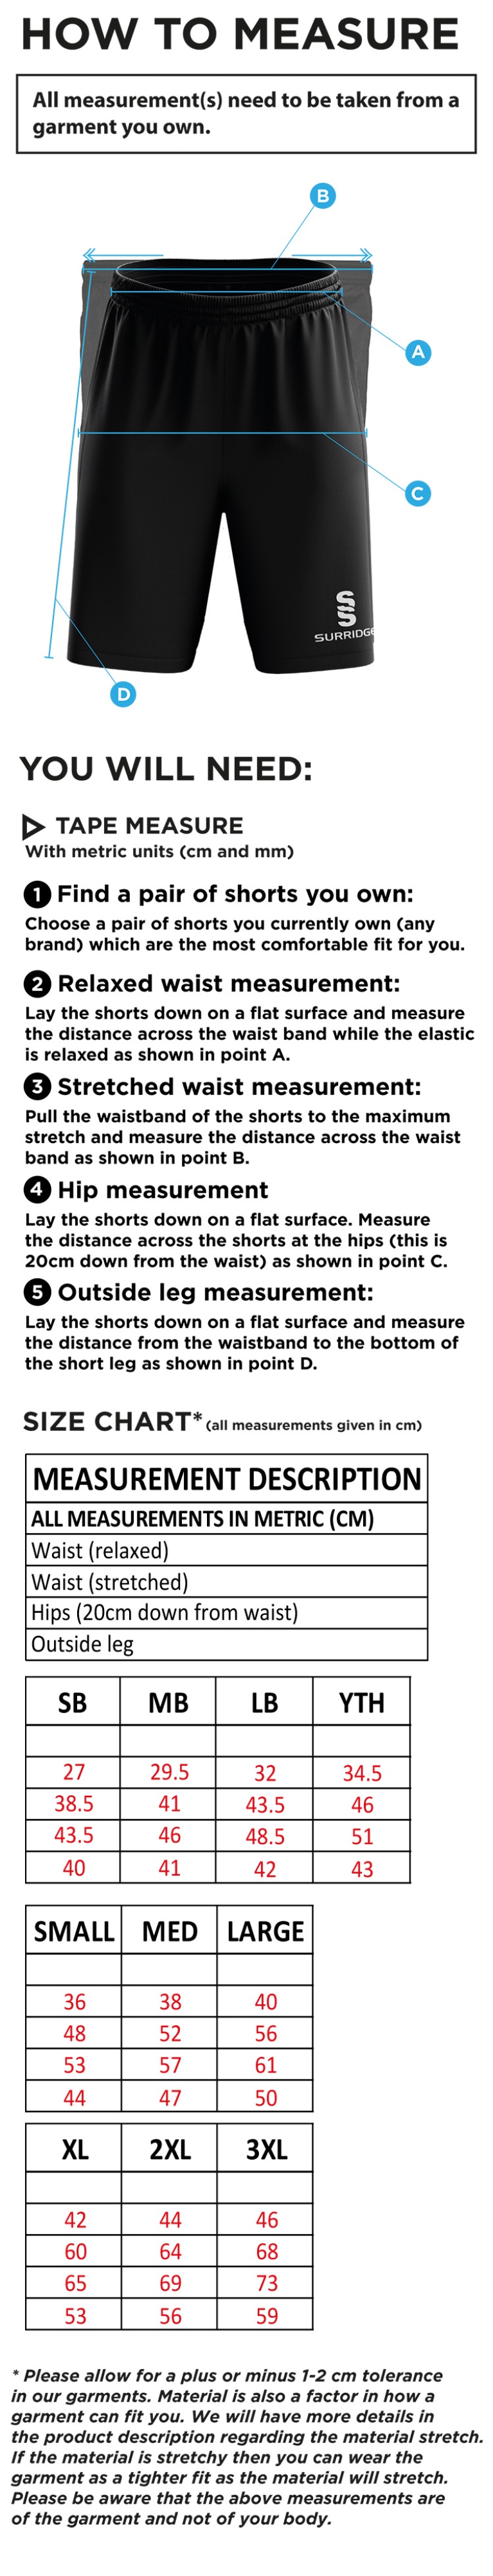 Northern Warriors - Blade Shorts - Size Guide